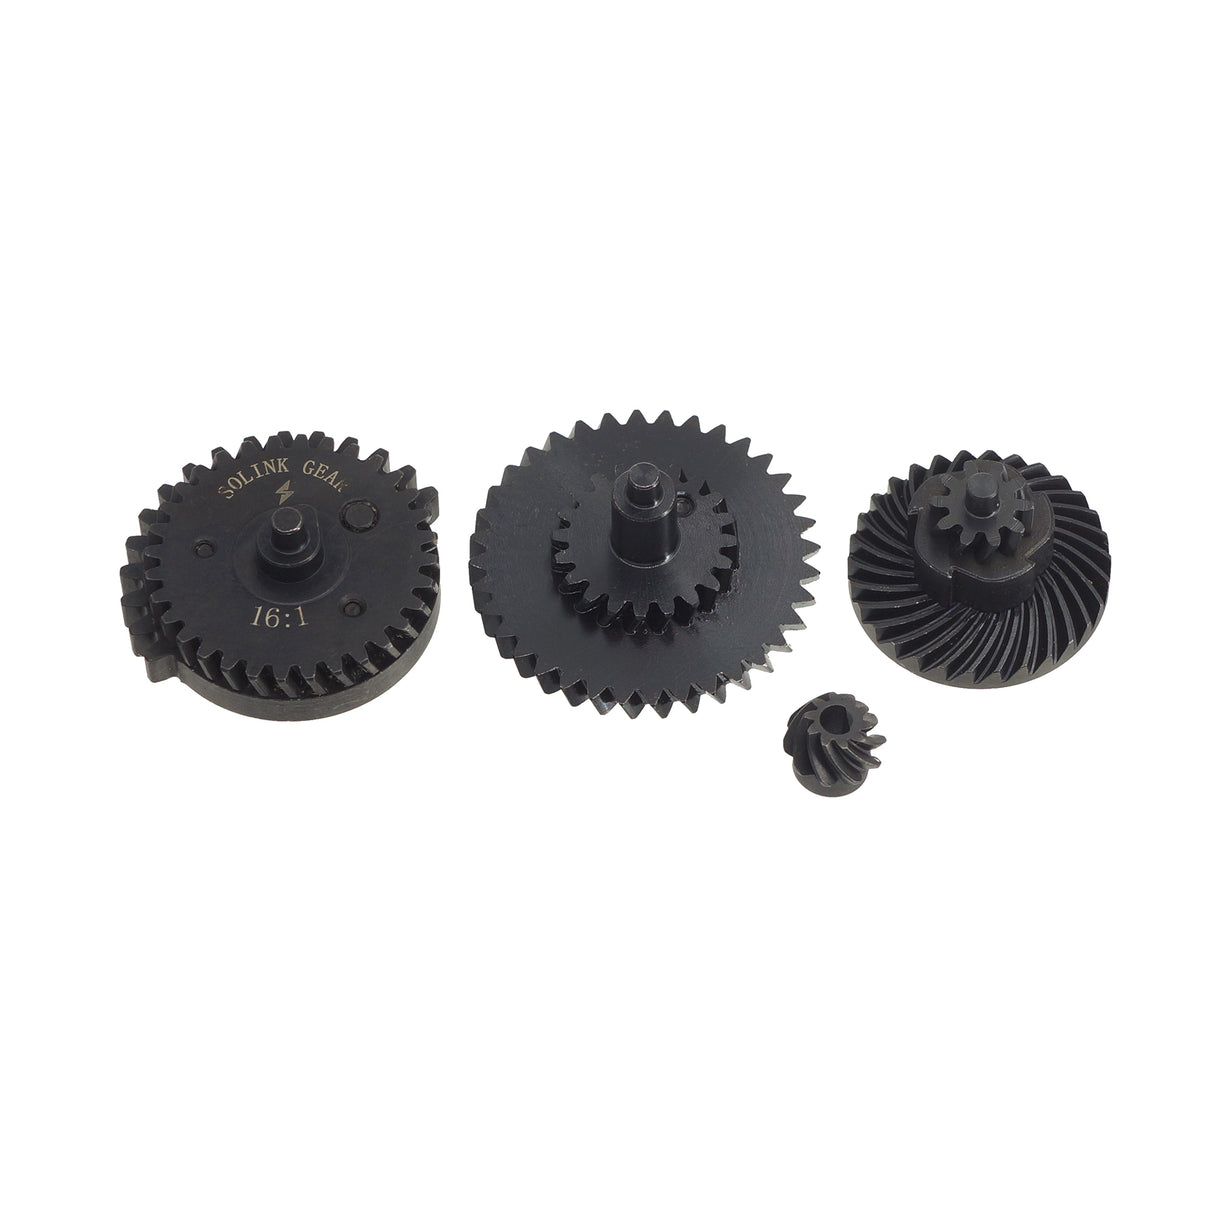 SOLINK 16:1 Steel Helical Gear Set for Gearbox Ver.2/3 ( CL-002 )